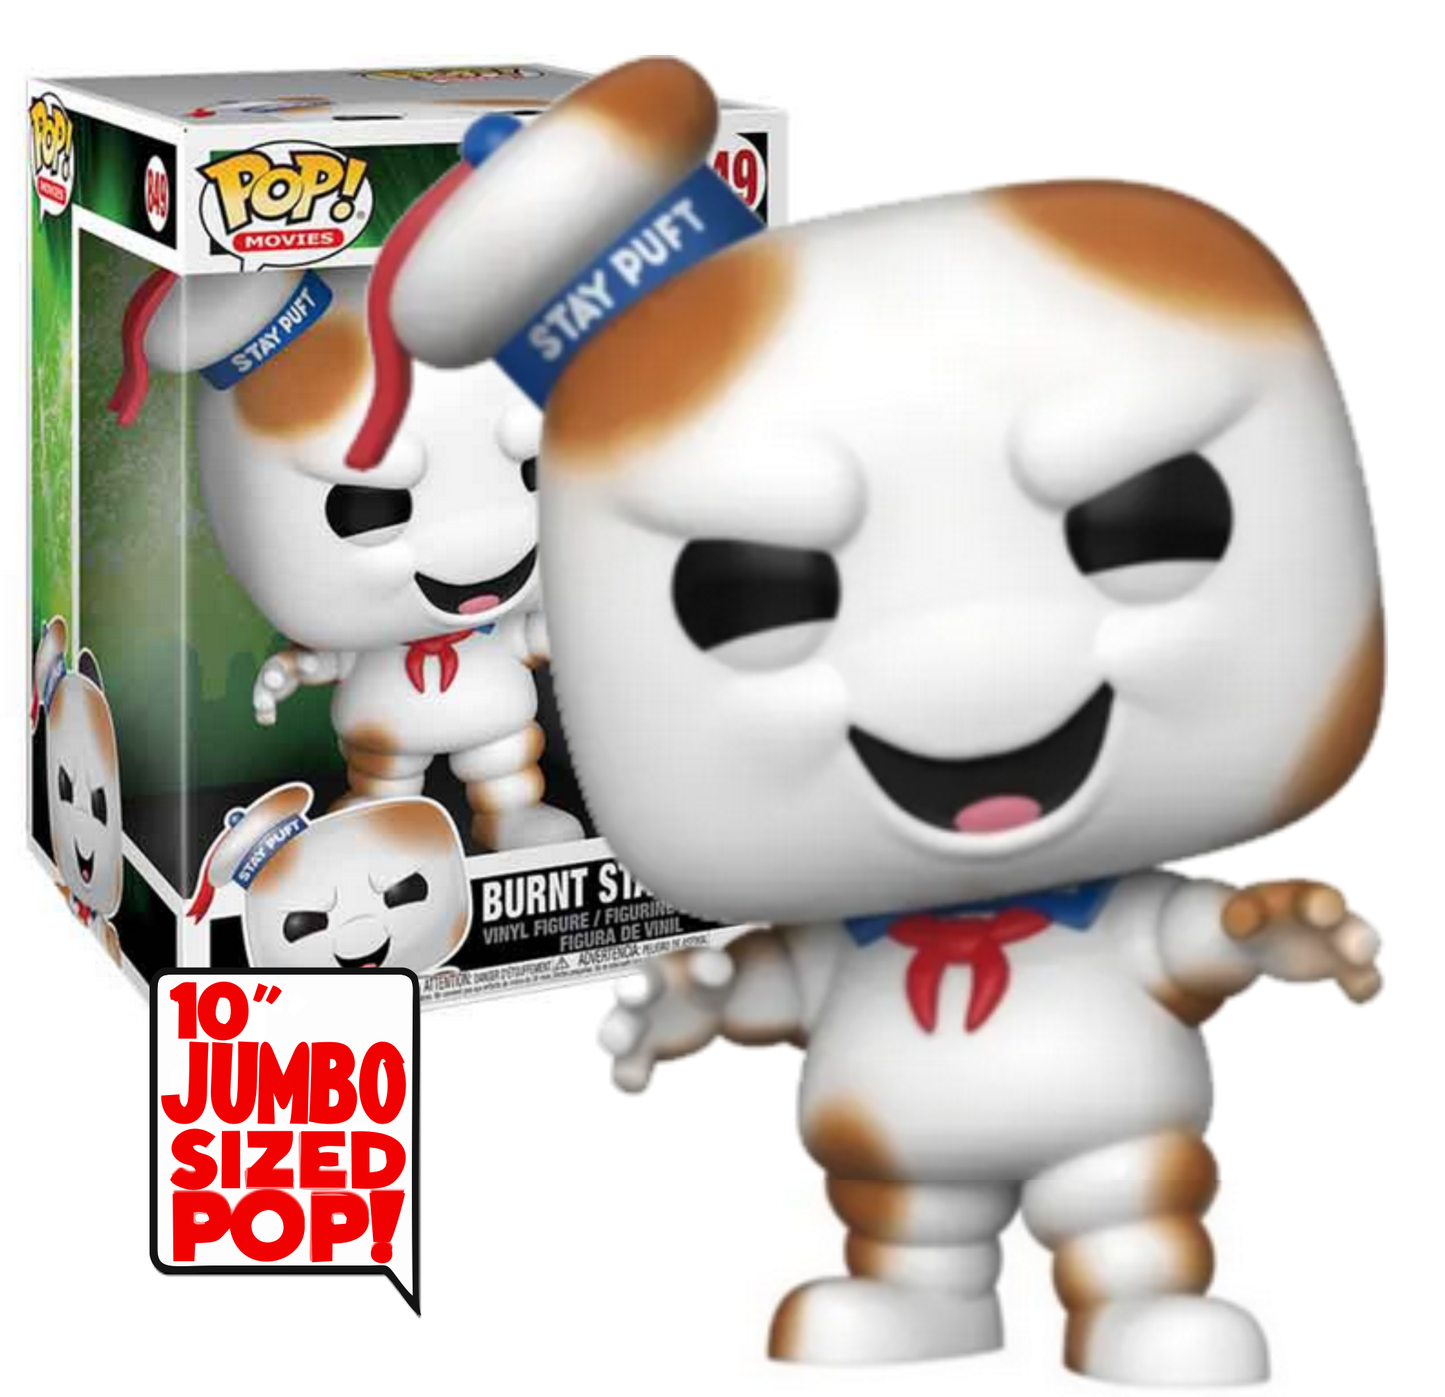 Ghost Busters Burnt Say Puft Marshmallow Man 10" Jumbo Size Special Edition Funko Pop! Vinyl